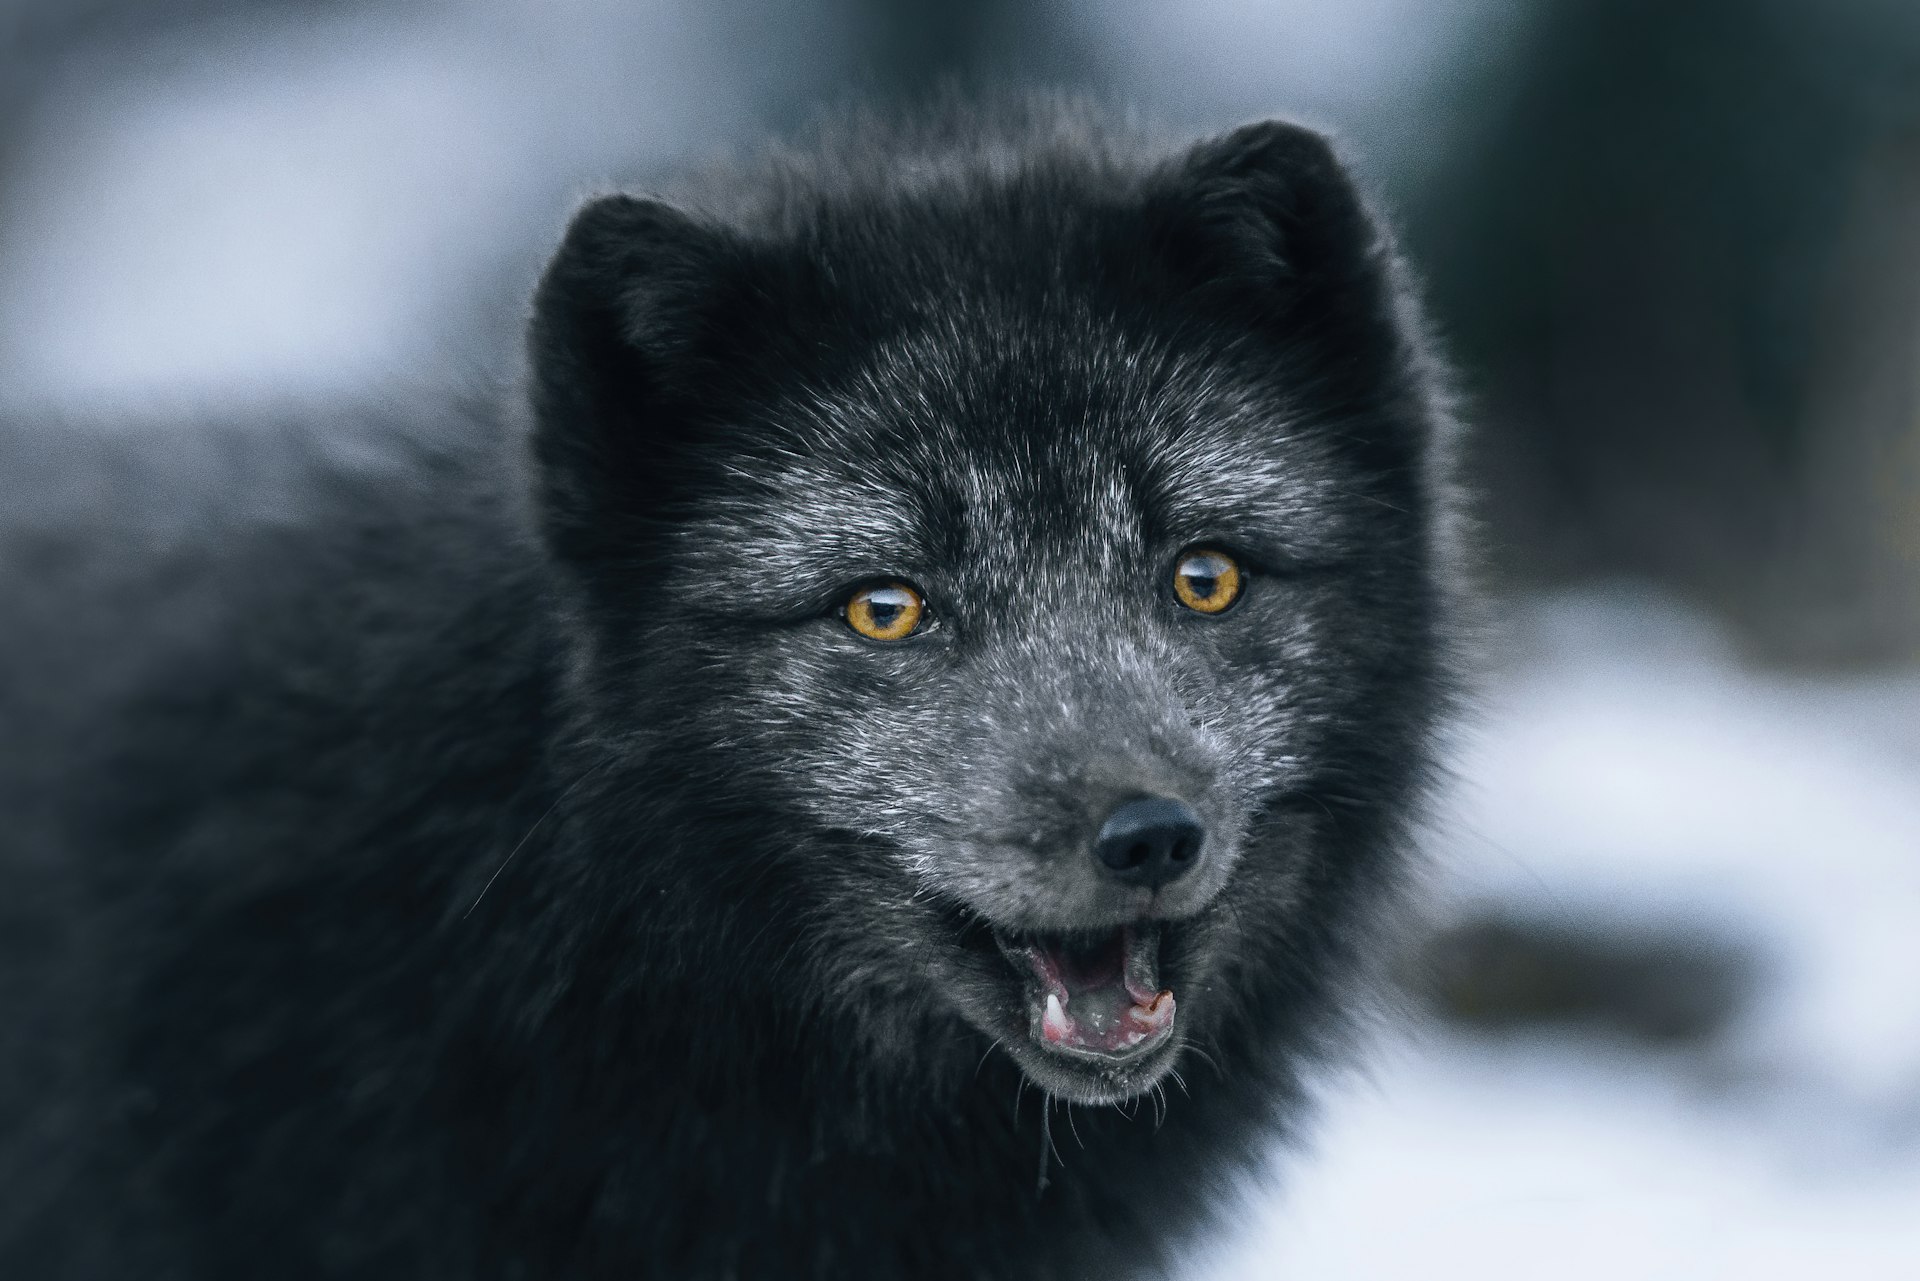 An arctic fox with black fur looks into the camera